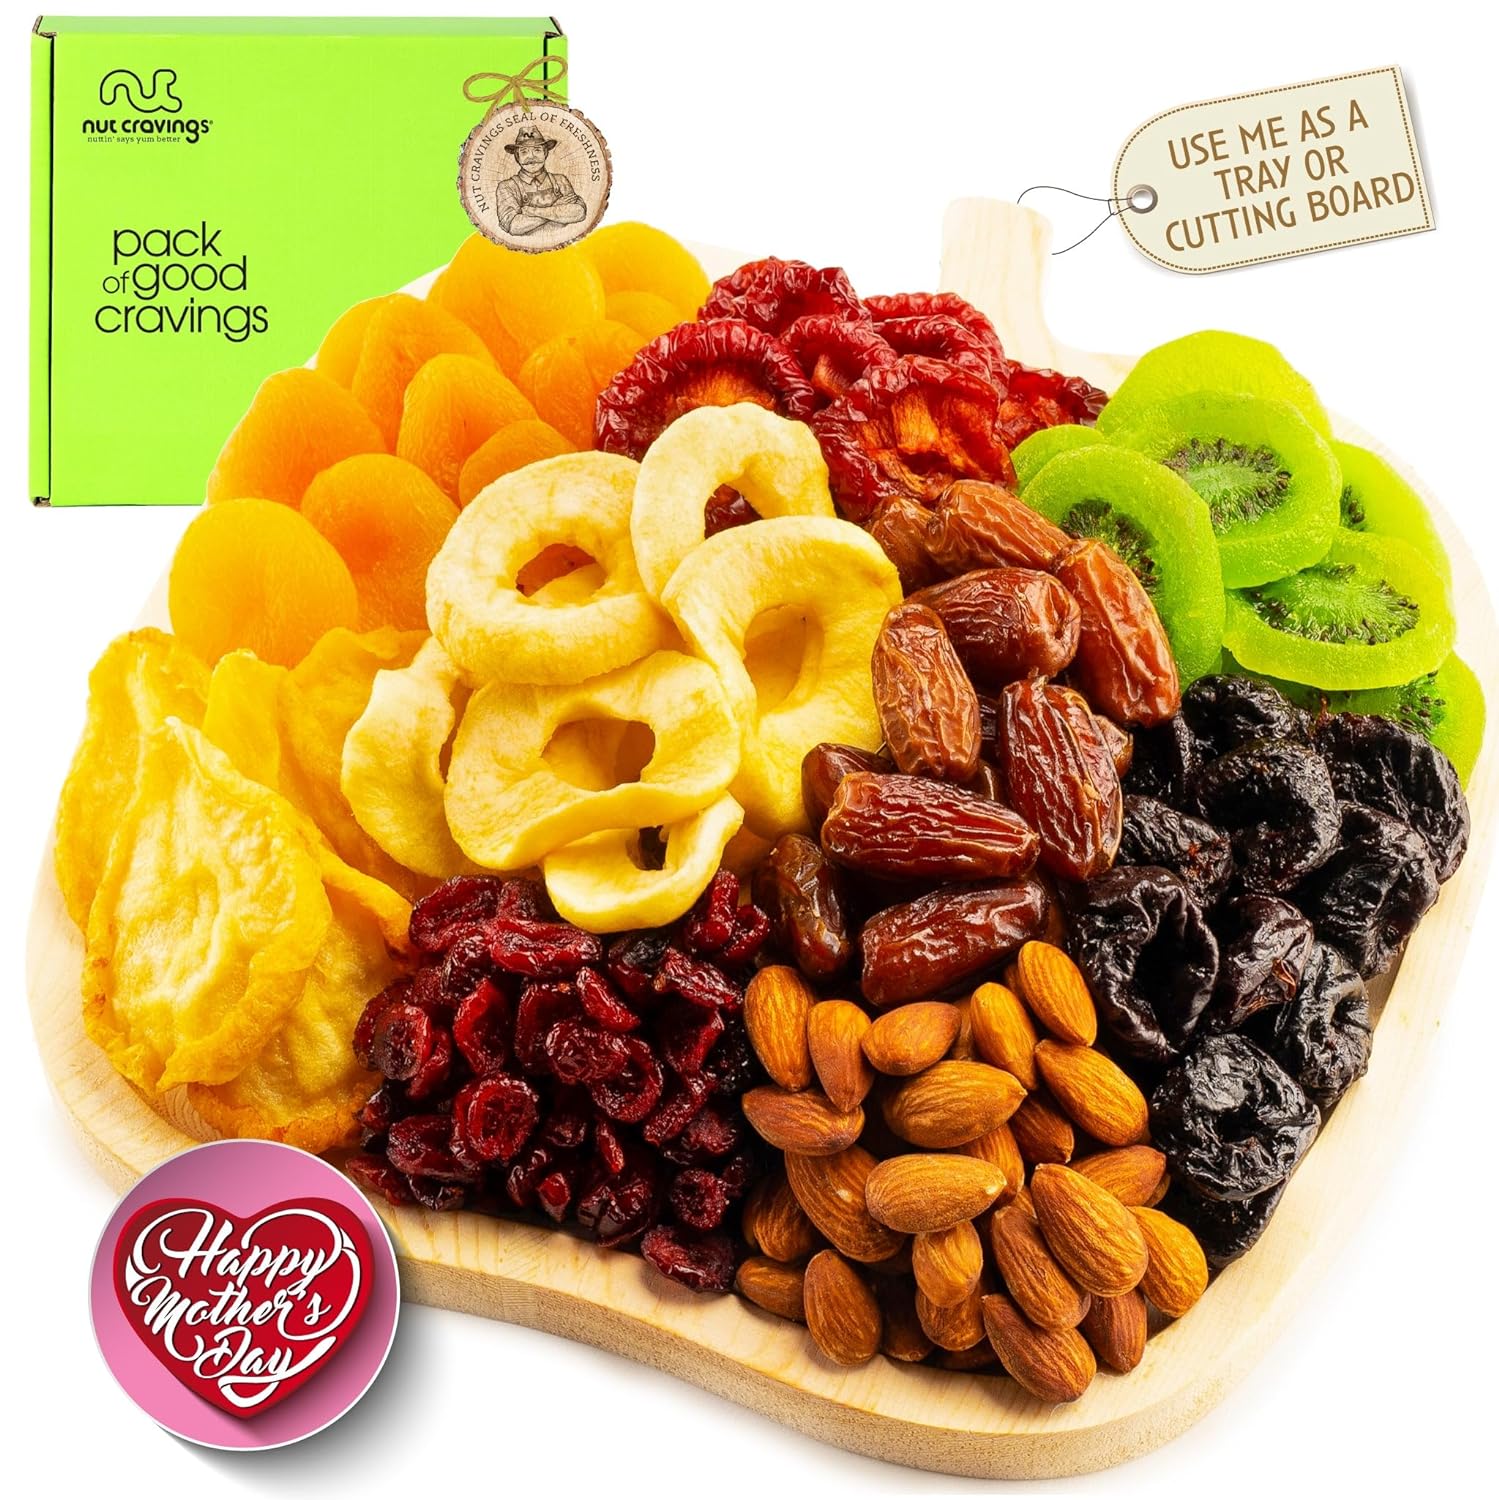 Nut Cravings Gourmet Collection - Mothers Day Dried Fruit & Mixed Nuts Gift Basket in Wooden Apple-Shaped Tray (9 Assortments) Arrangement Platter, Healthy Kosher USA Made